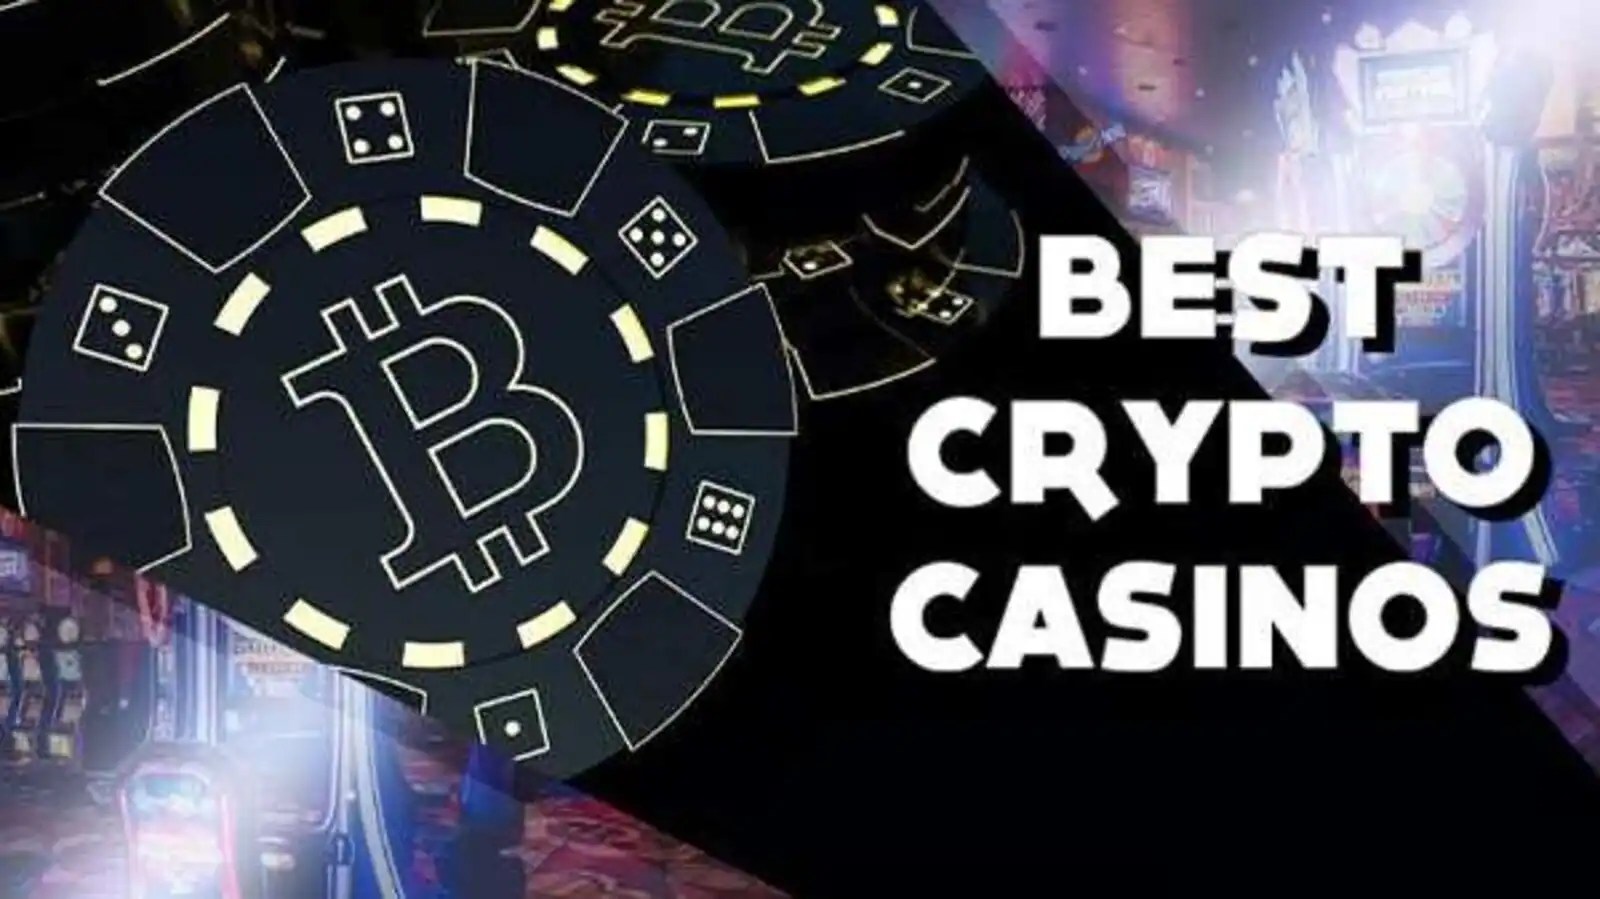 Discover The Best Casino Site In India For Gaming Enthusiasts: 10bet